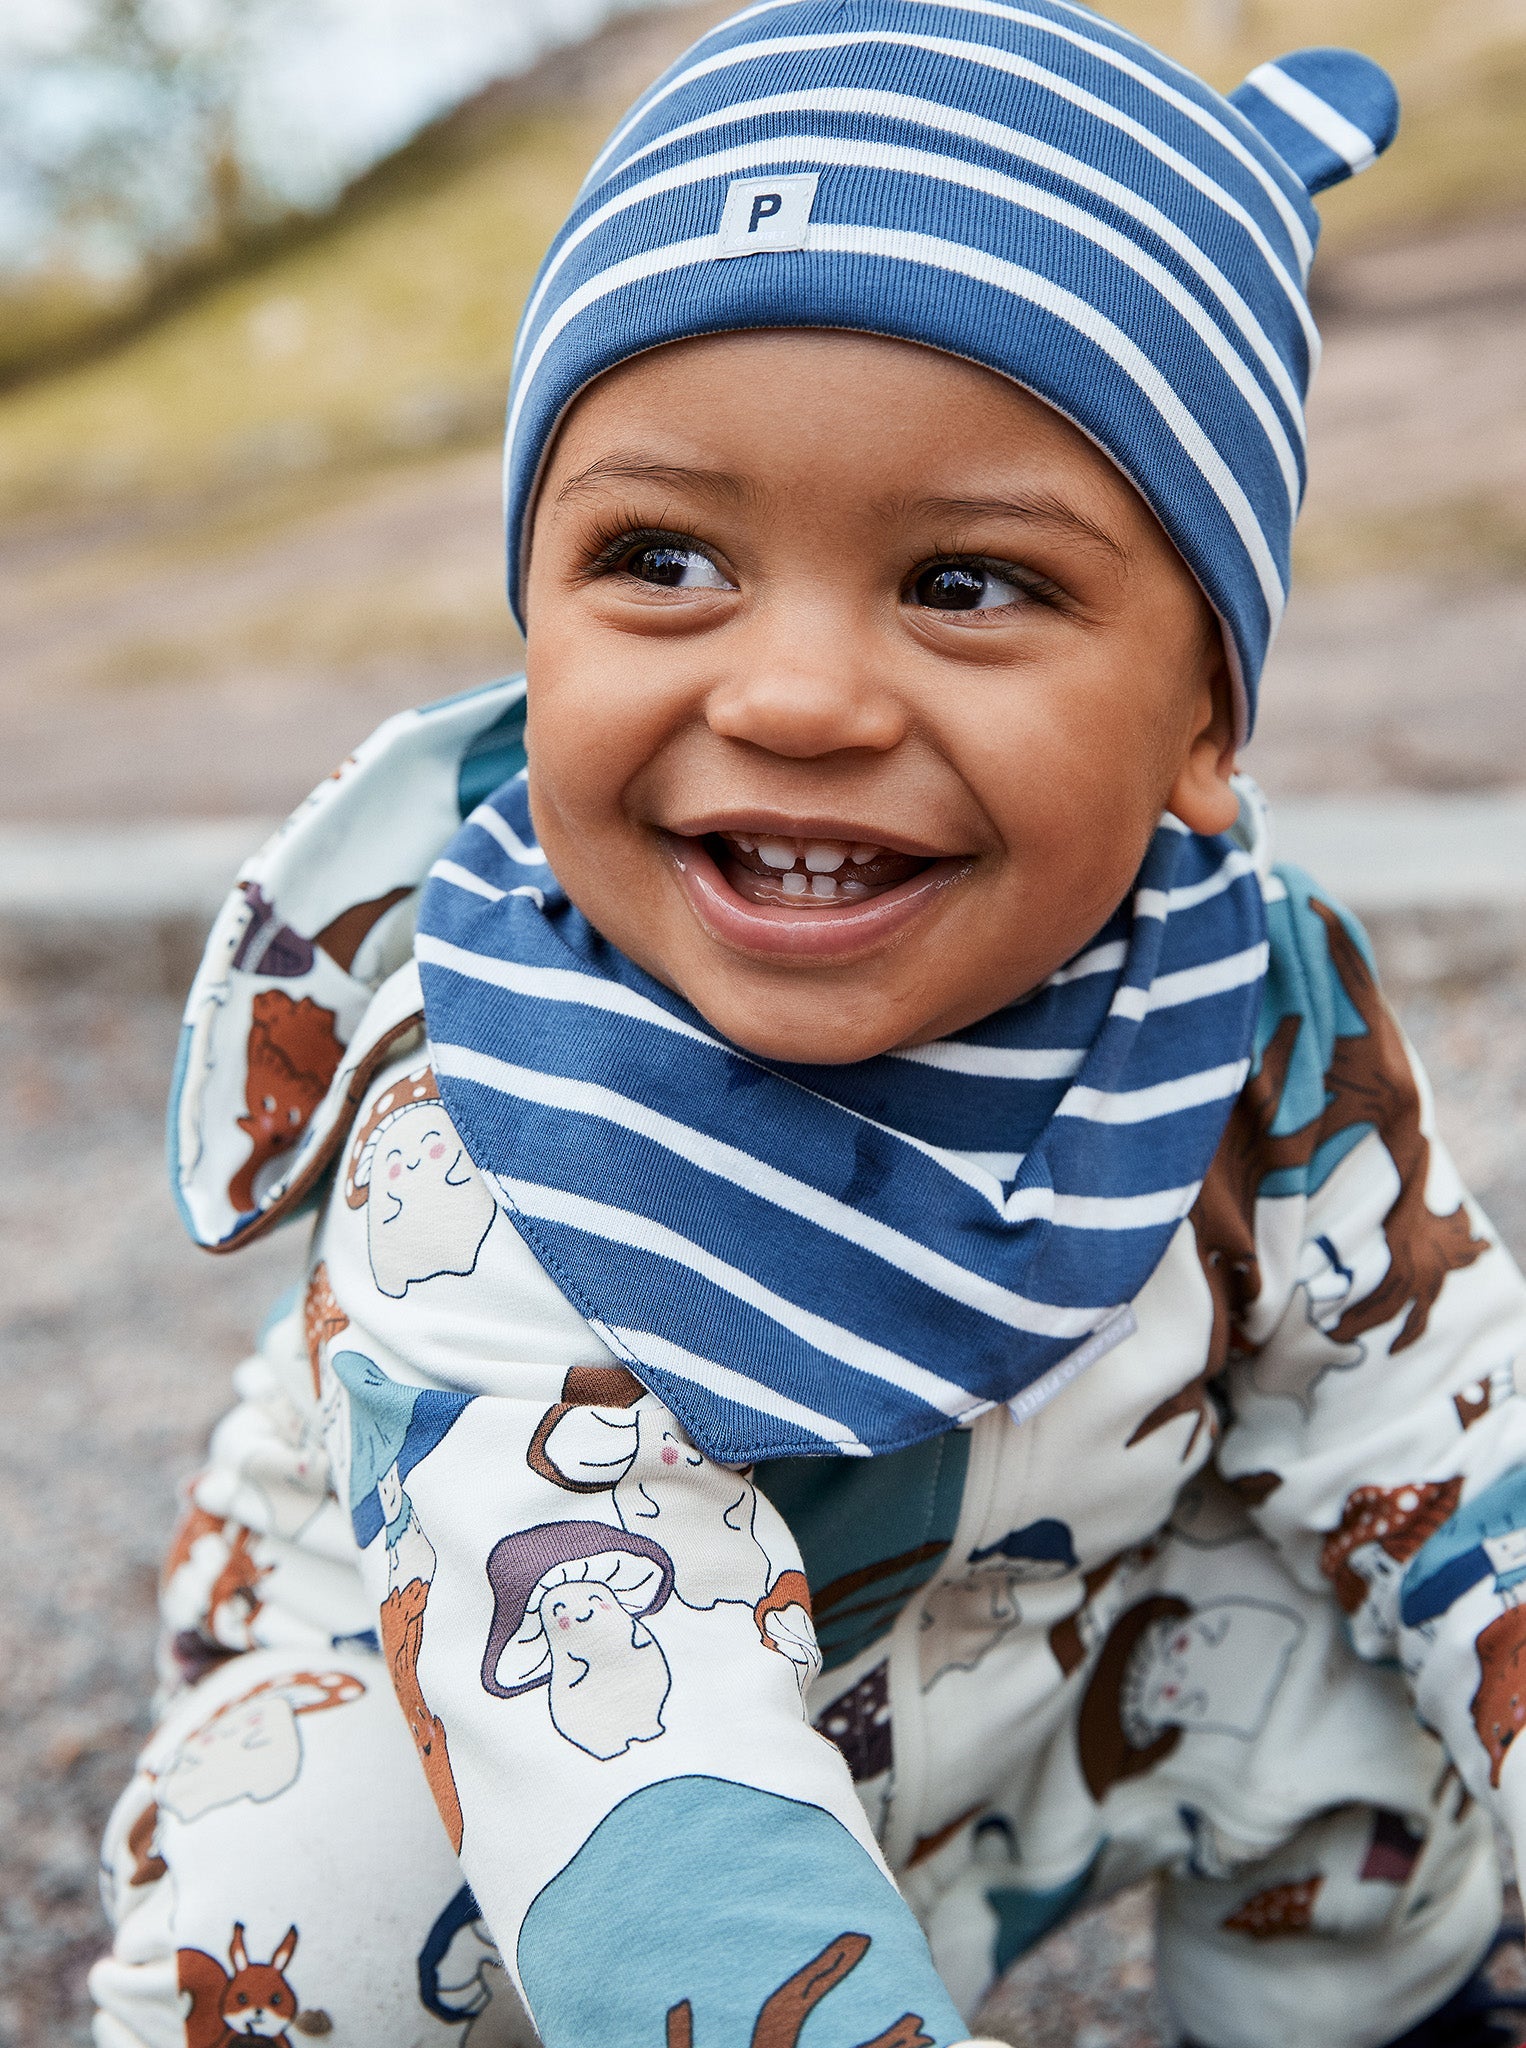 Organic Cotton Blue Baby Bib from the Polarn O. Pyret Kidswear collection. Ethically produced kids clothing.